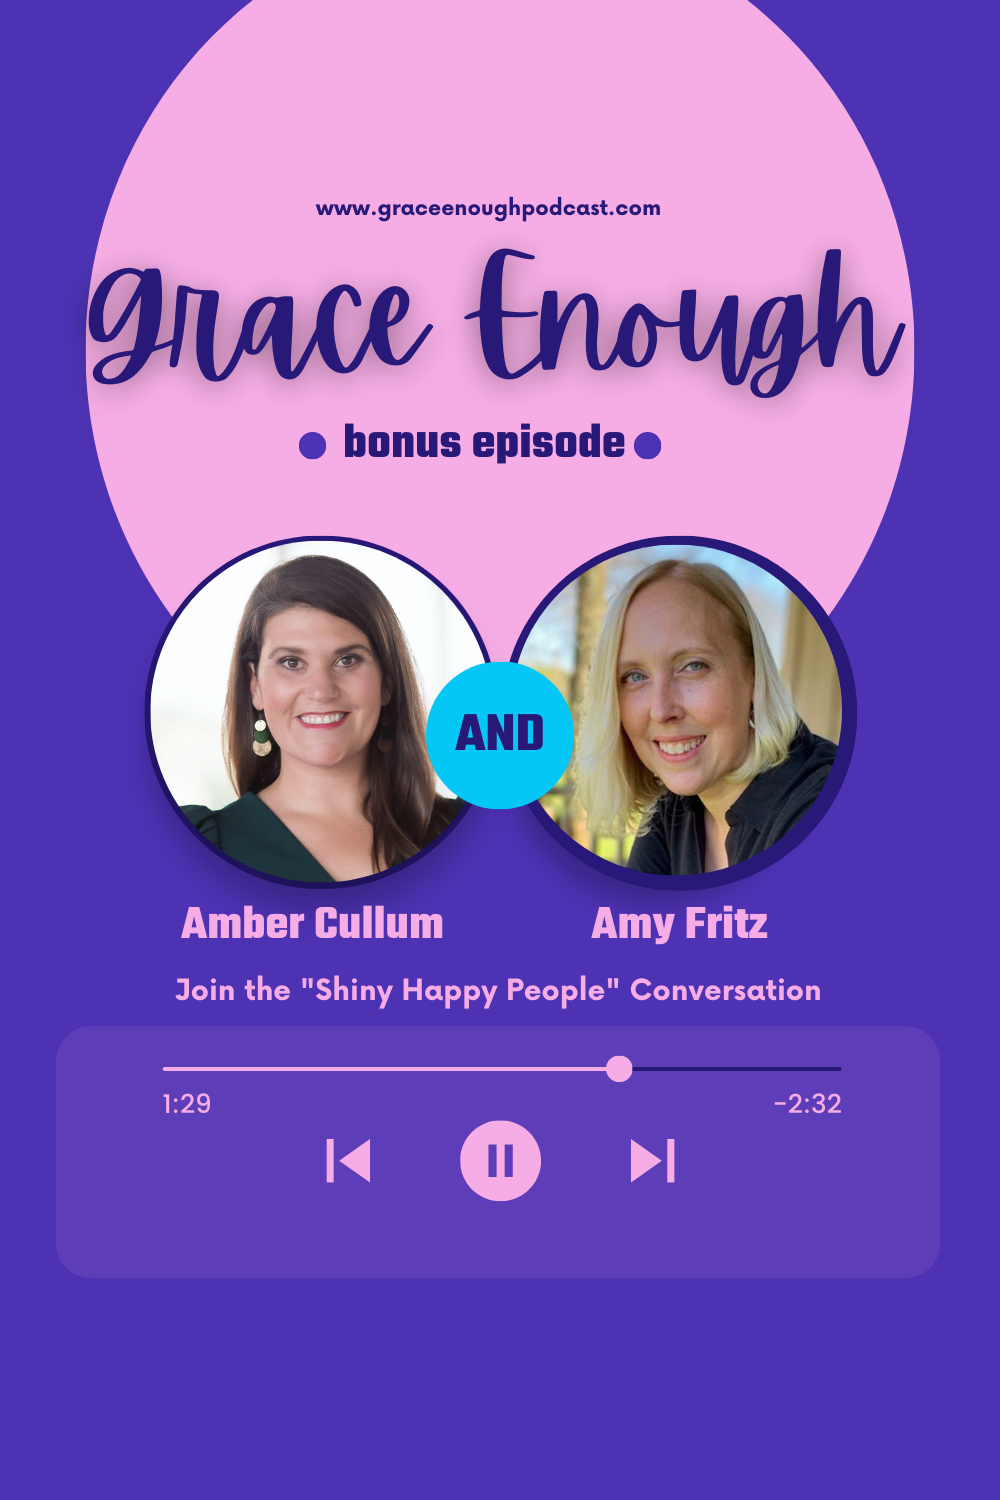 Join the Shiny Happy People Conversation with Amber Cullum and Amy Fritz